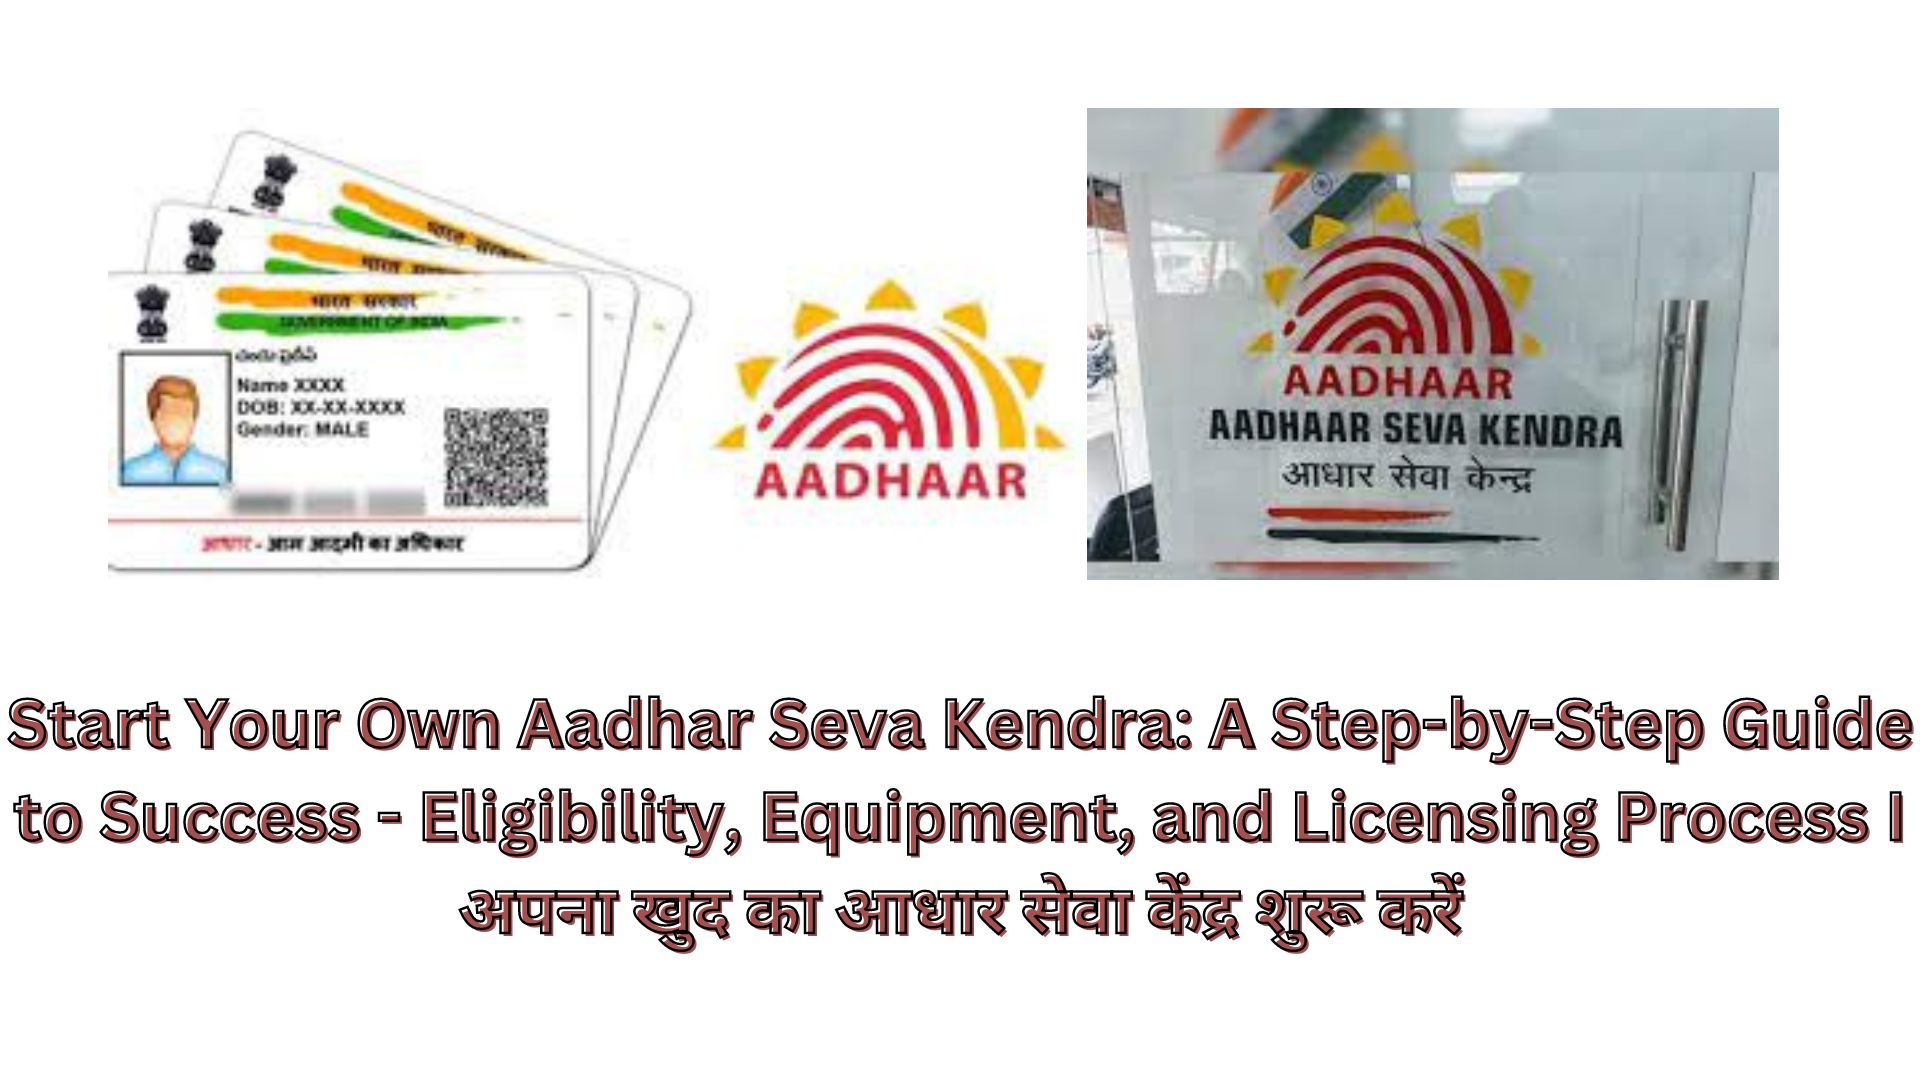 Start Your Own Aadhar Seva Kendra: A Step-by-Step Guide to Success - Eligibility, Equipment, and Licensing Process I अपना खुद का आधार सेवा केंद्र शुरू करें